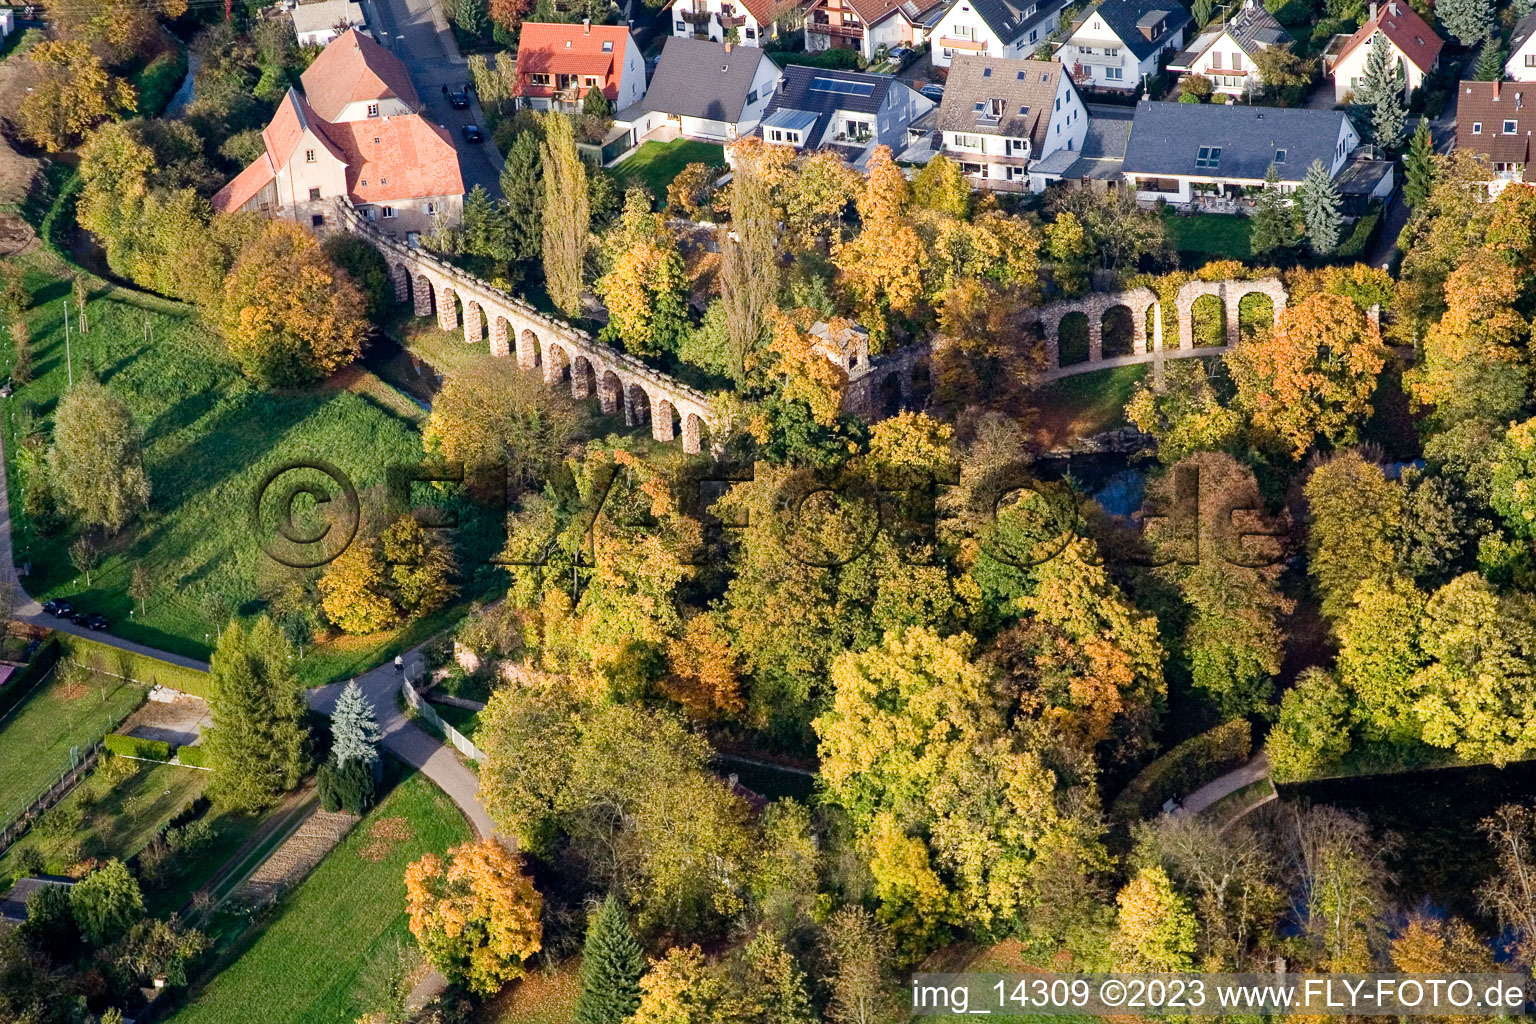 Schwetzingen in the state Baden-Wuerttemberg, Germany from the drone perspective